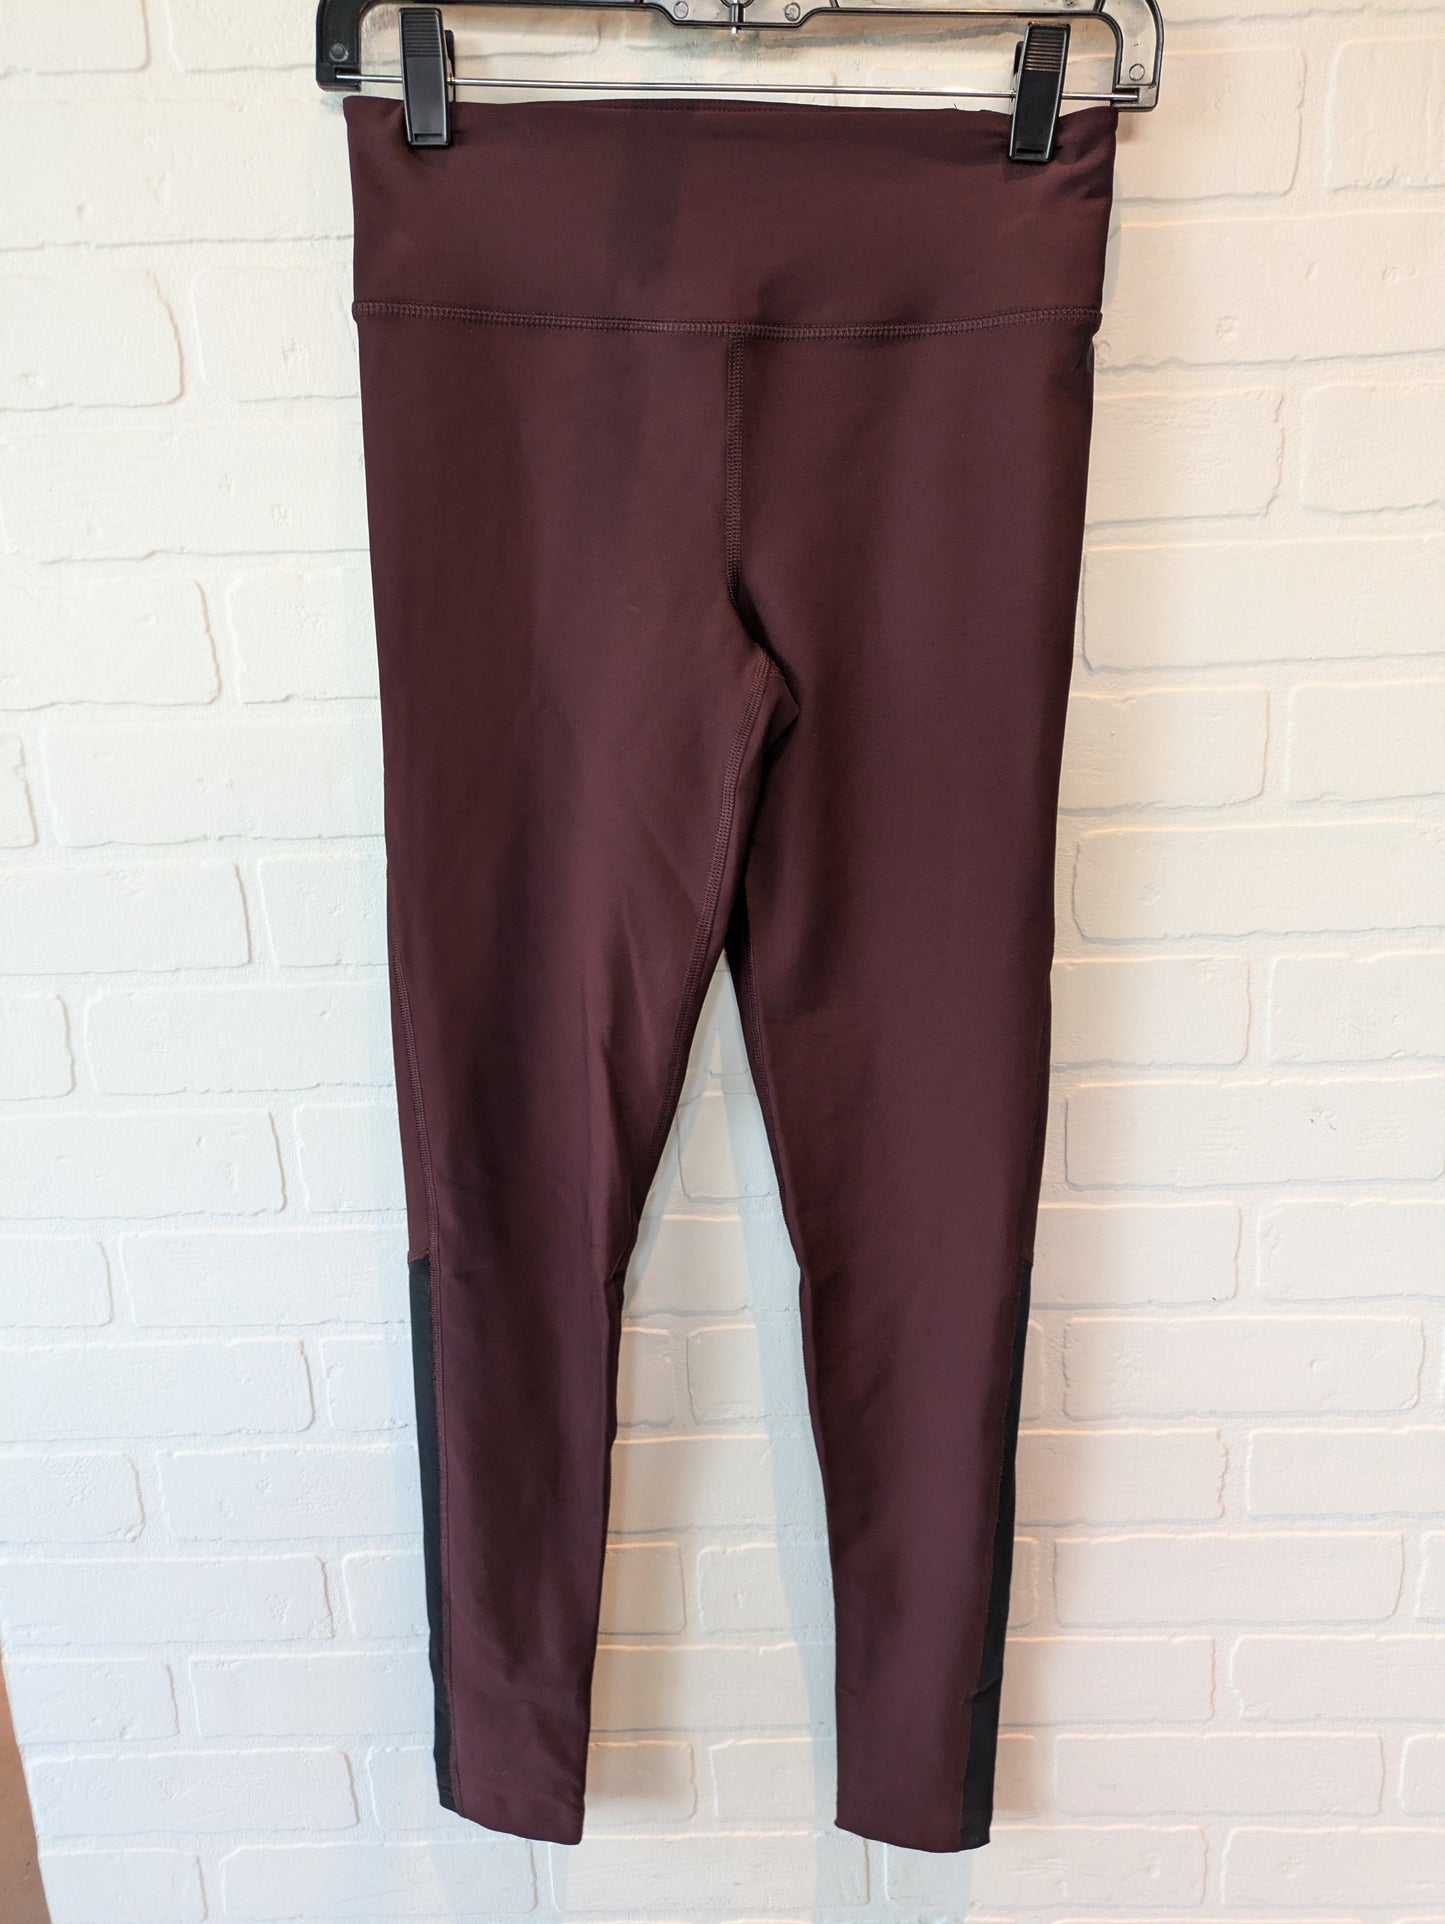 Red Athletic Leggings Clothes Mentor, Size 4